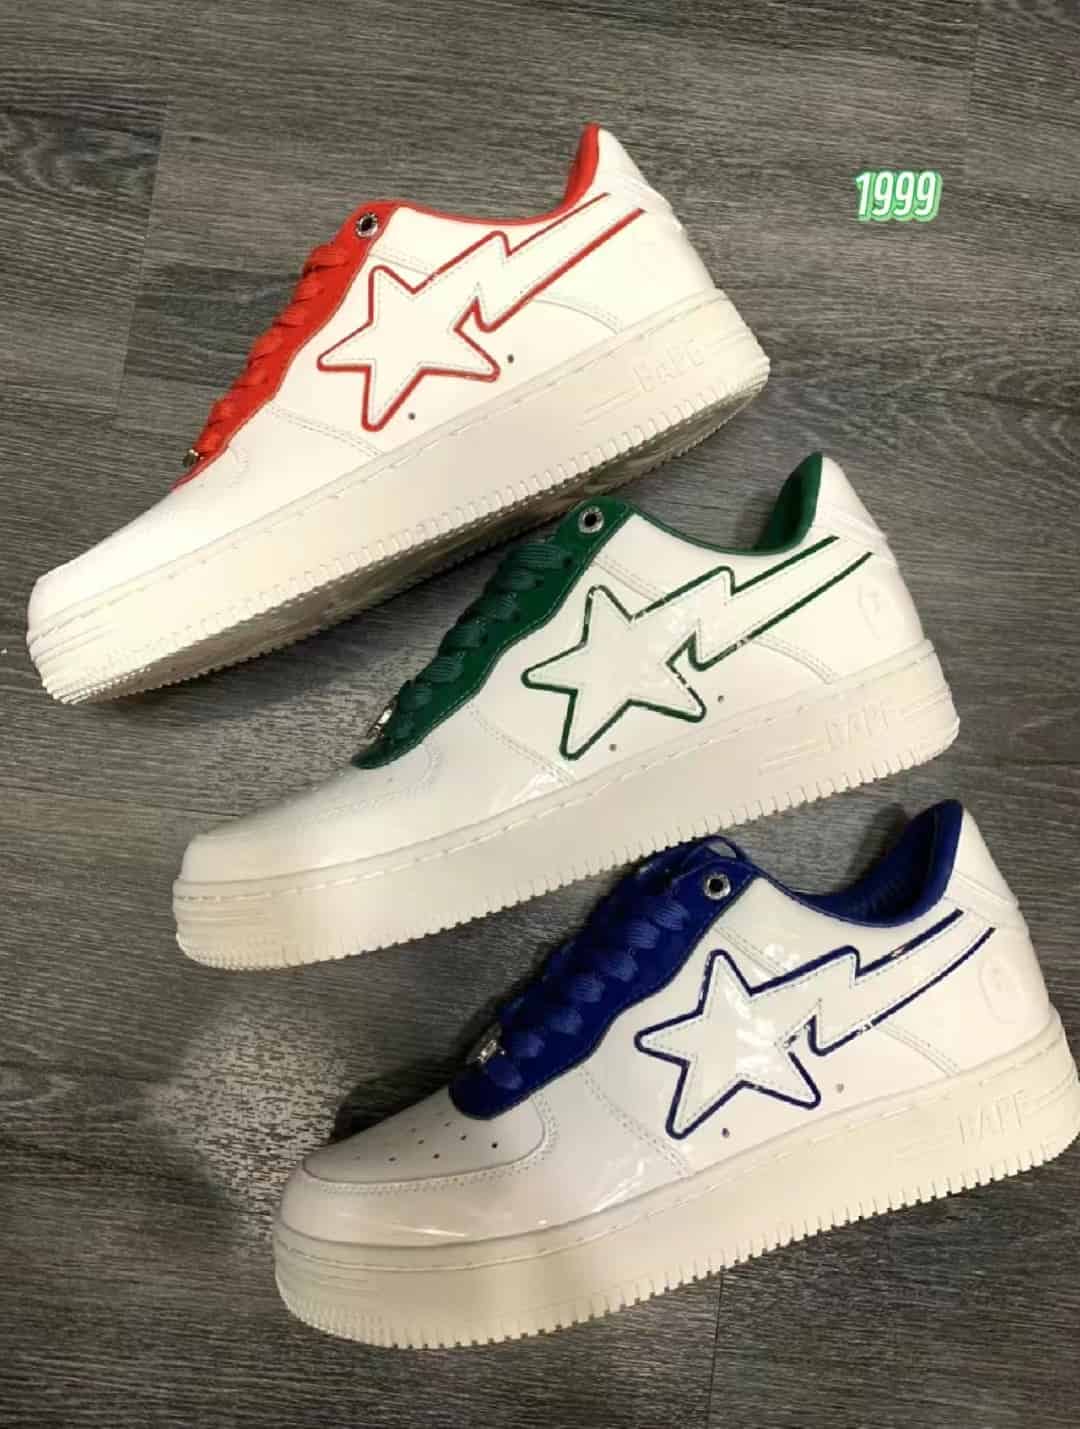 Bape Sta Patent Leather White Blue Reps: A Fusion of Style and Substance